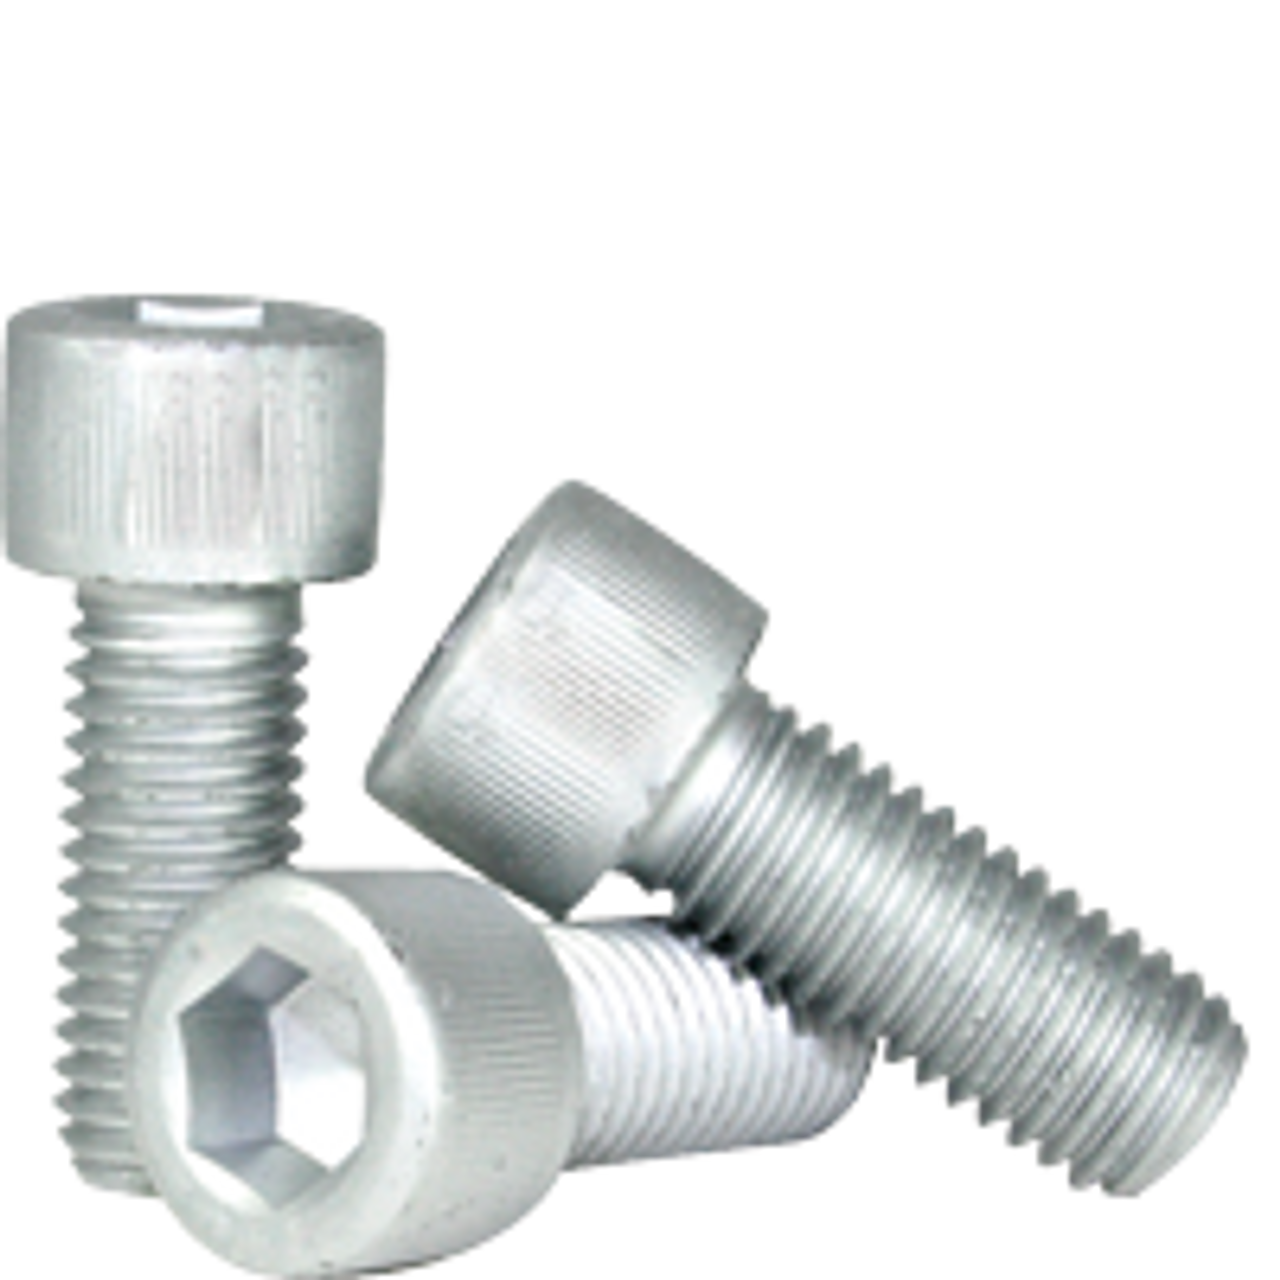 00002527-M6X20-SUS, Hex Head Bolt with Various Washer Options - M4 - M8,  Phillips, Maruemu